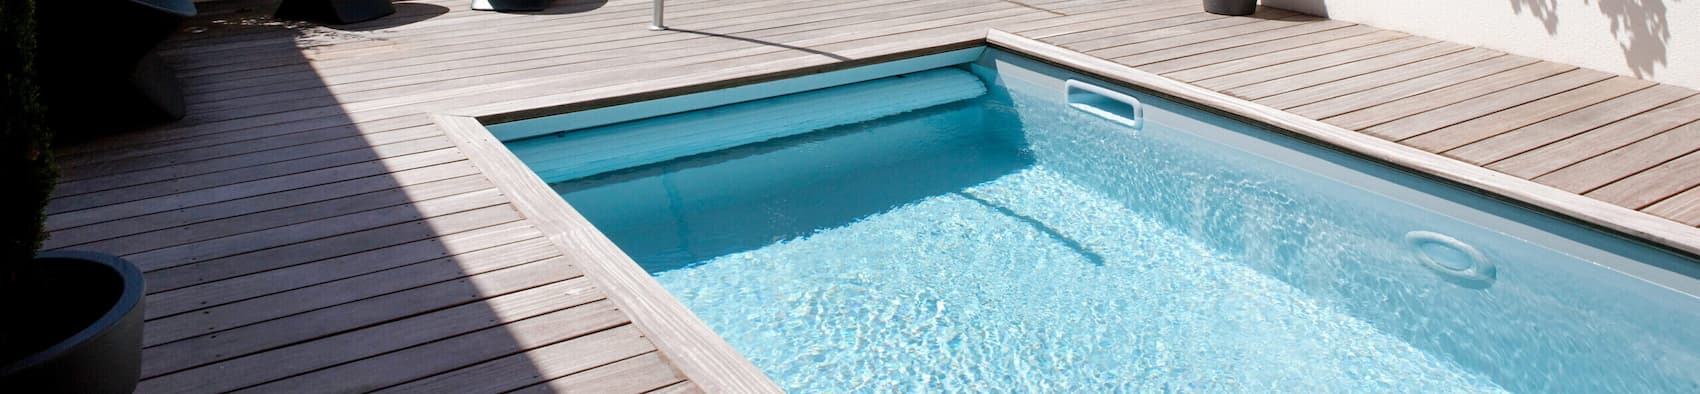 smartcover piscine ambiance